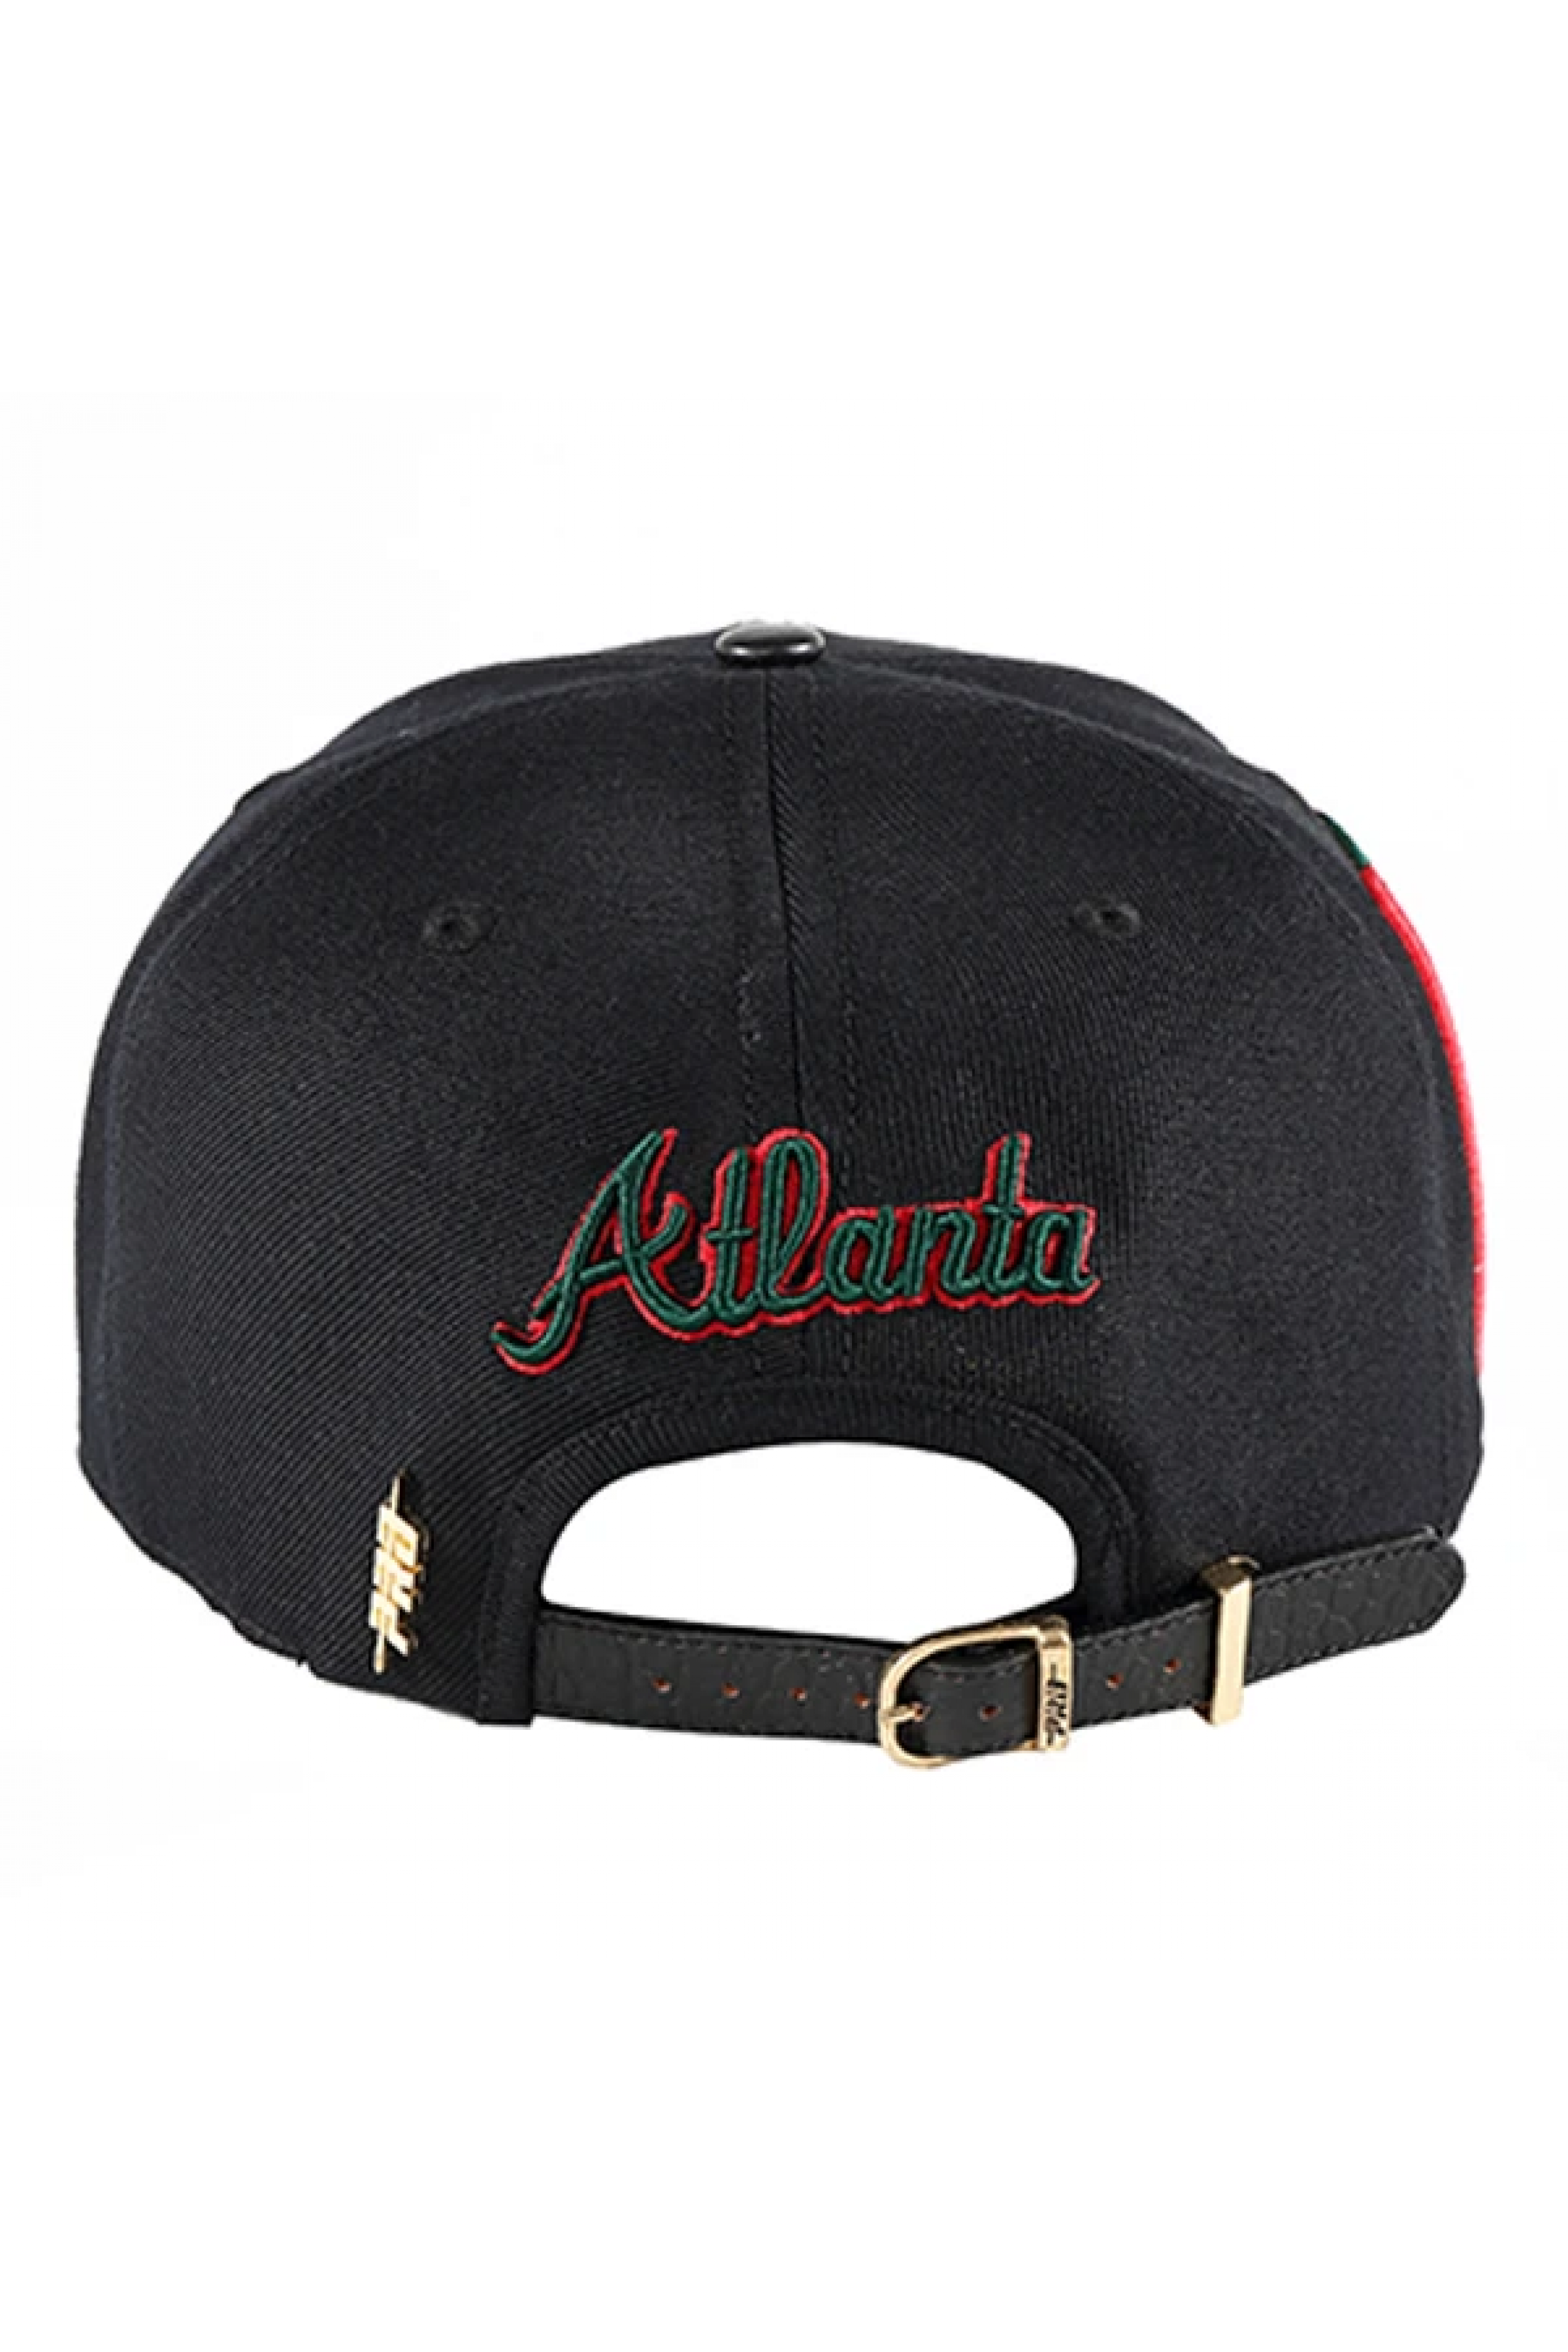  Atlanta Braves Unisex Adult Adjustable Low Profile Charcoal  Gray Cap Hat with White and Black Embroidered A/Tomahawk Logo and Stitched  Red Nickname on Bill : Sports & Outdoors